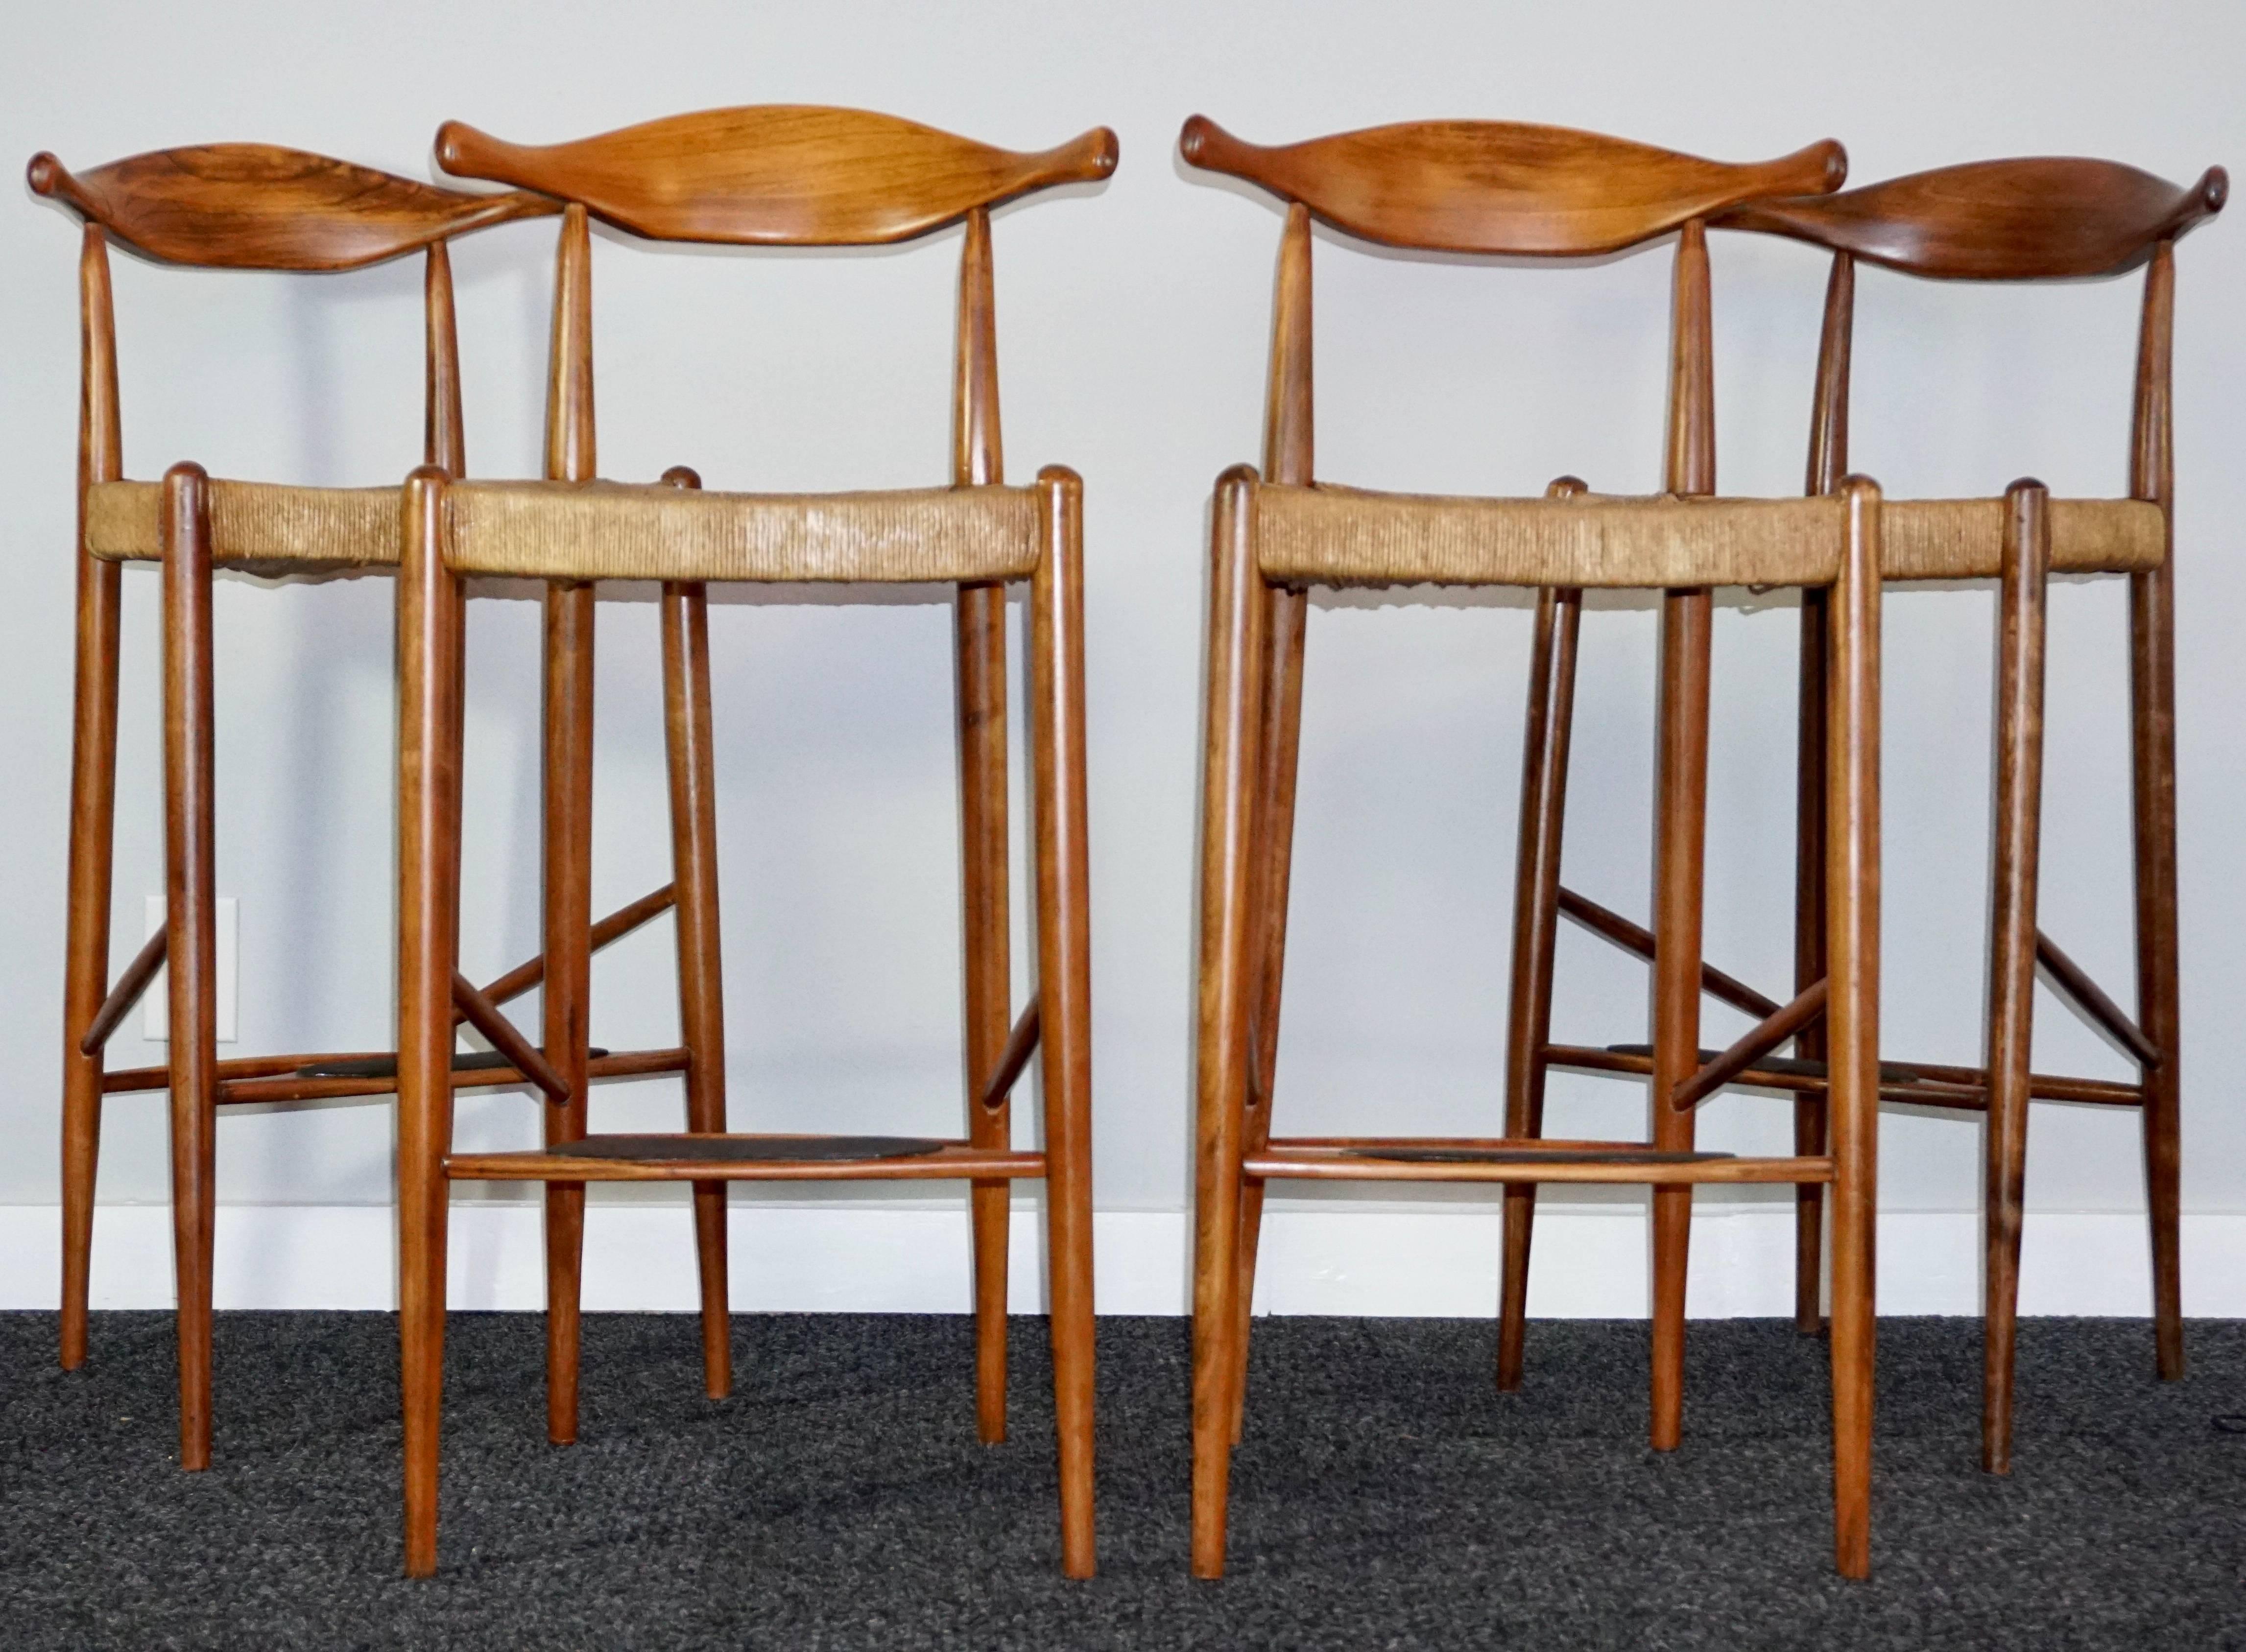 Arthur Umanoff 
Set of four (4) teak and rush rattan seated cow horn stools designed and built in the late 1950s in Denmark by the Umanoff atelier.

Measures: Height 39 inches 
Width 18 inches
Depth 15 inches.

Best known for his chairs and seating